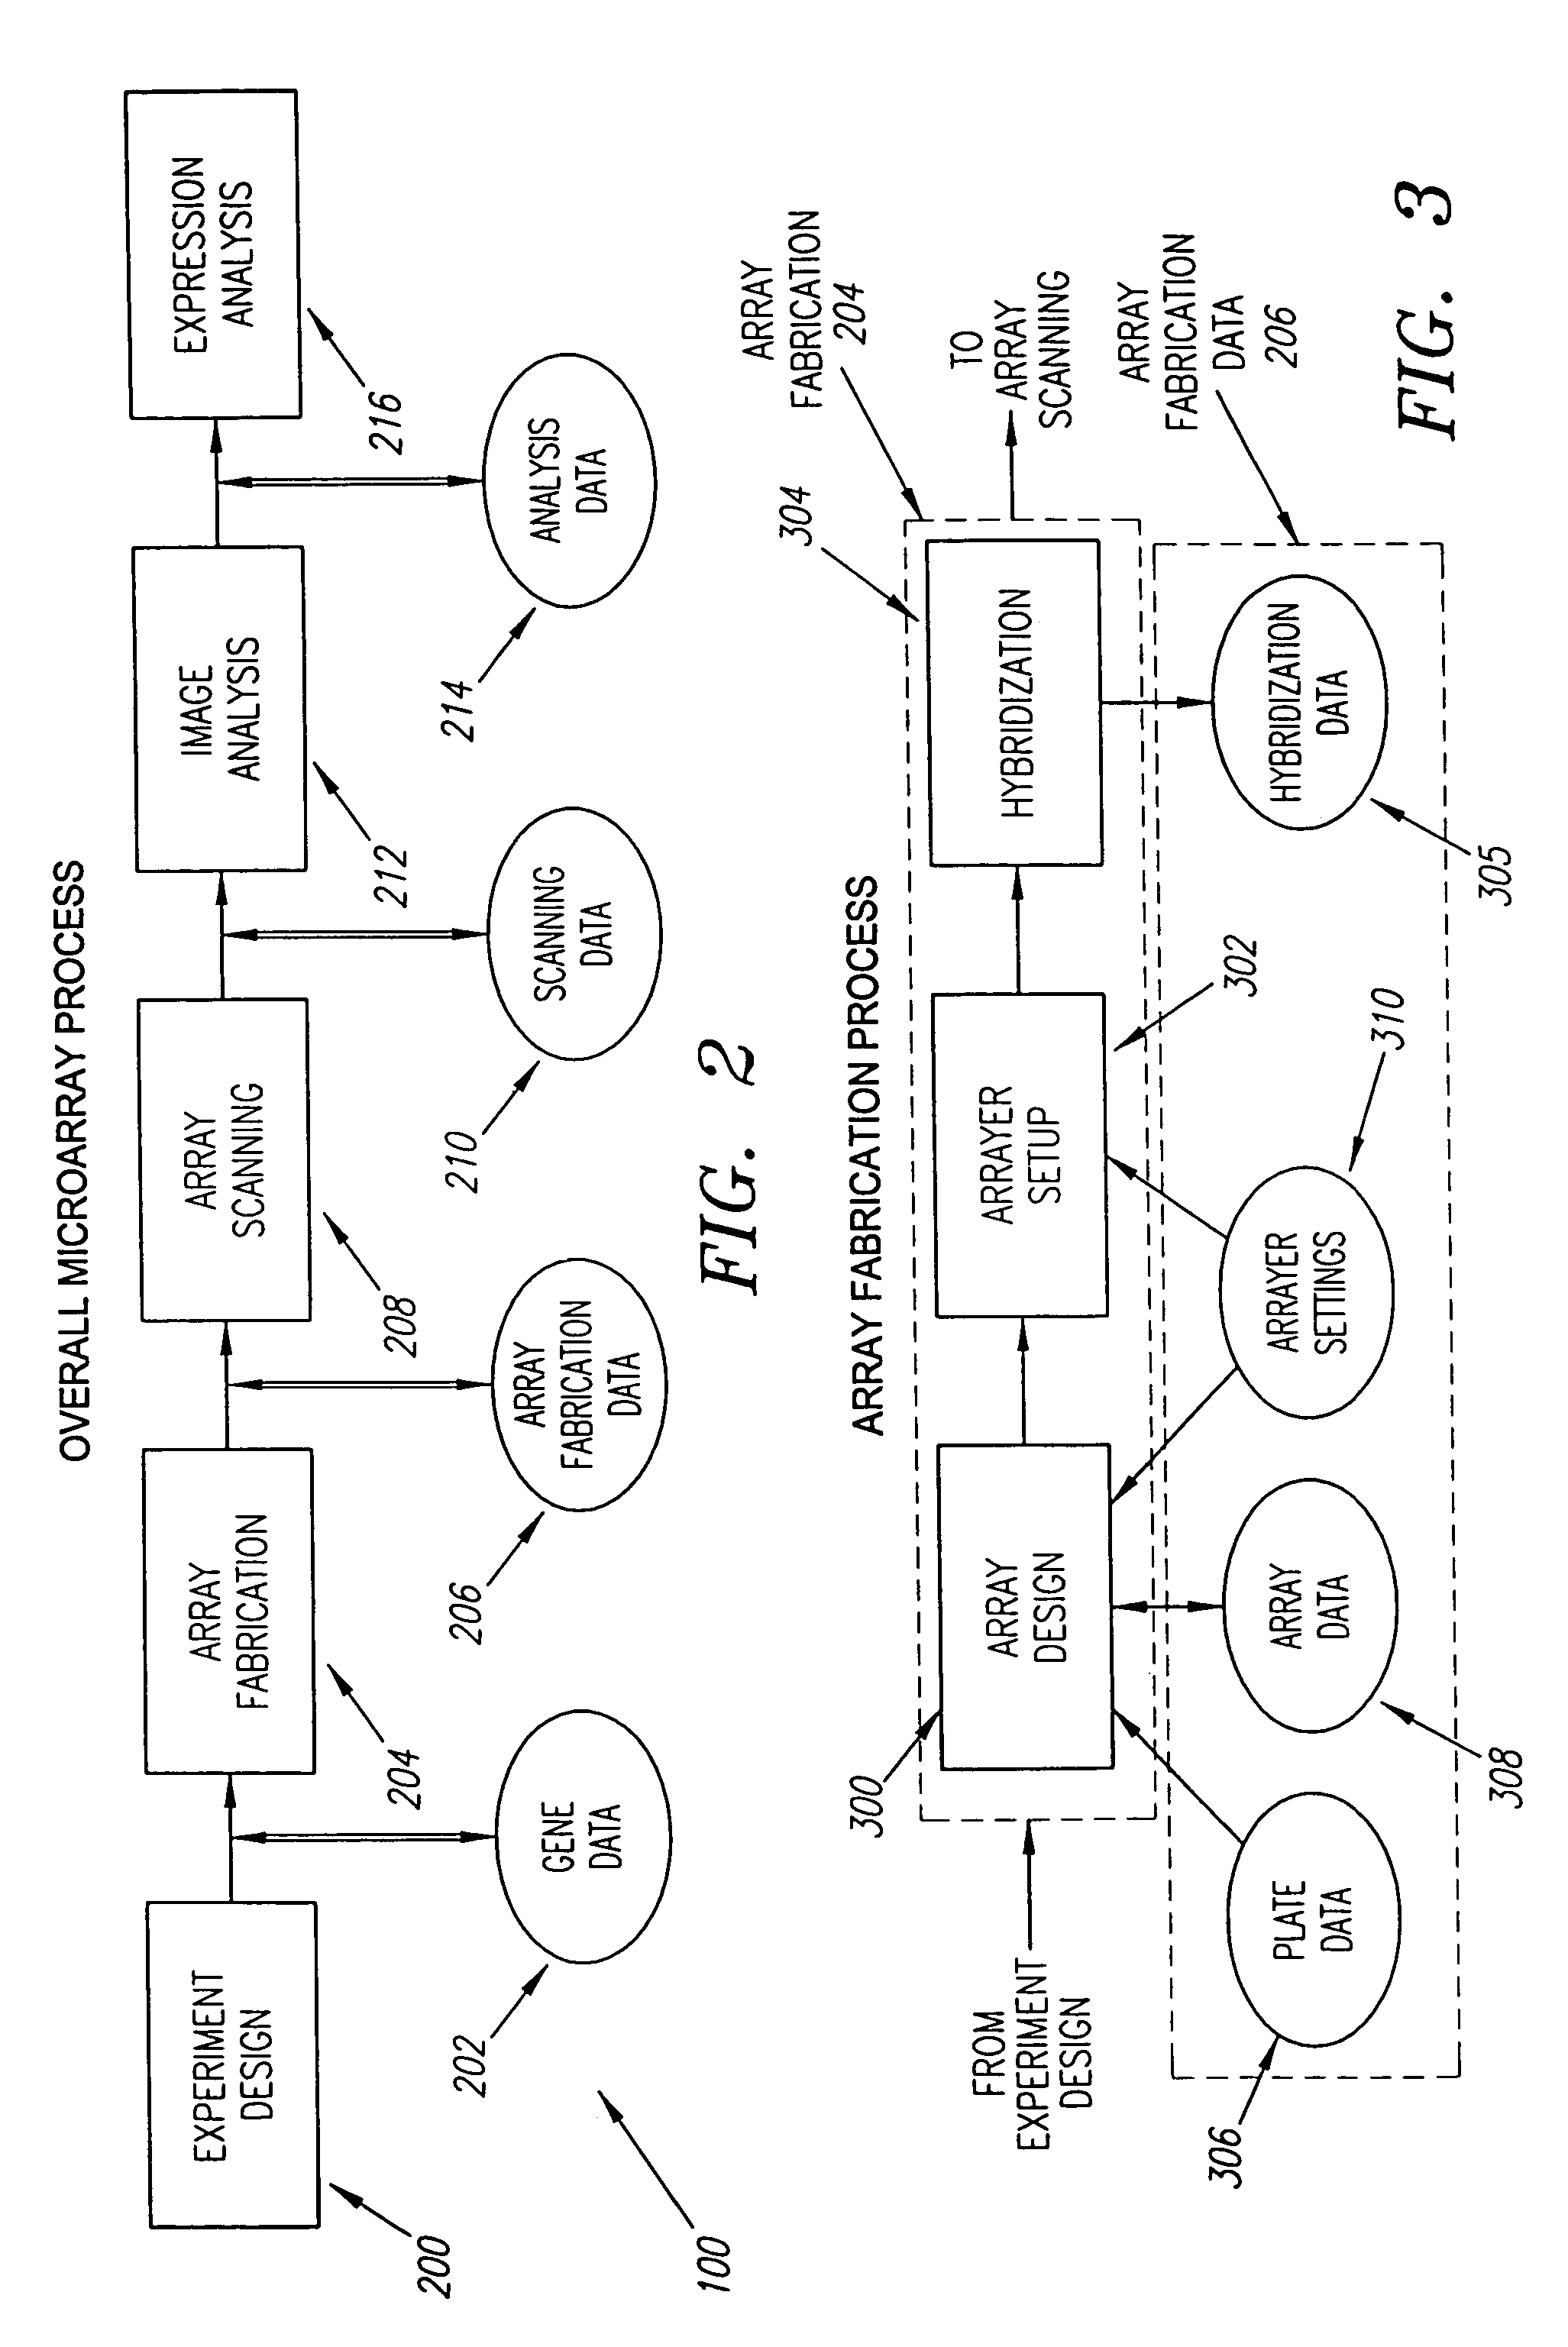 System and method for automatically identifying sub-grids in a microarray